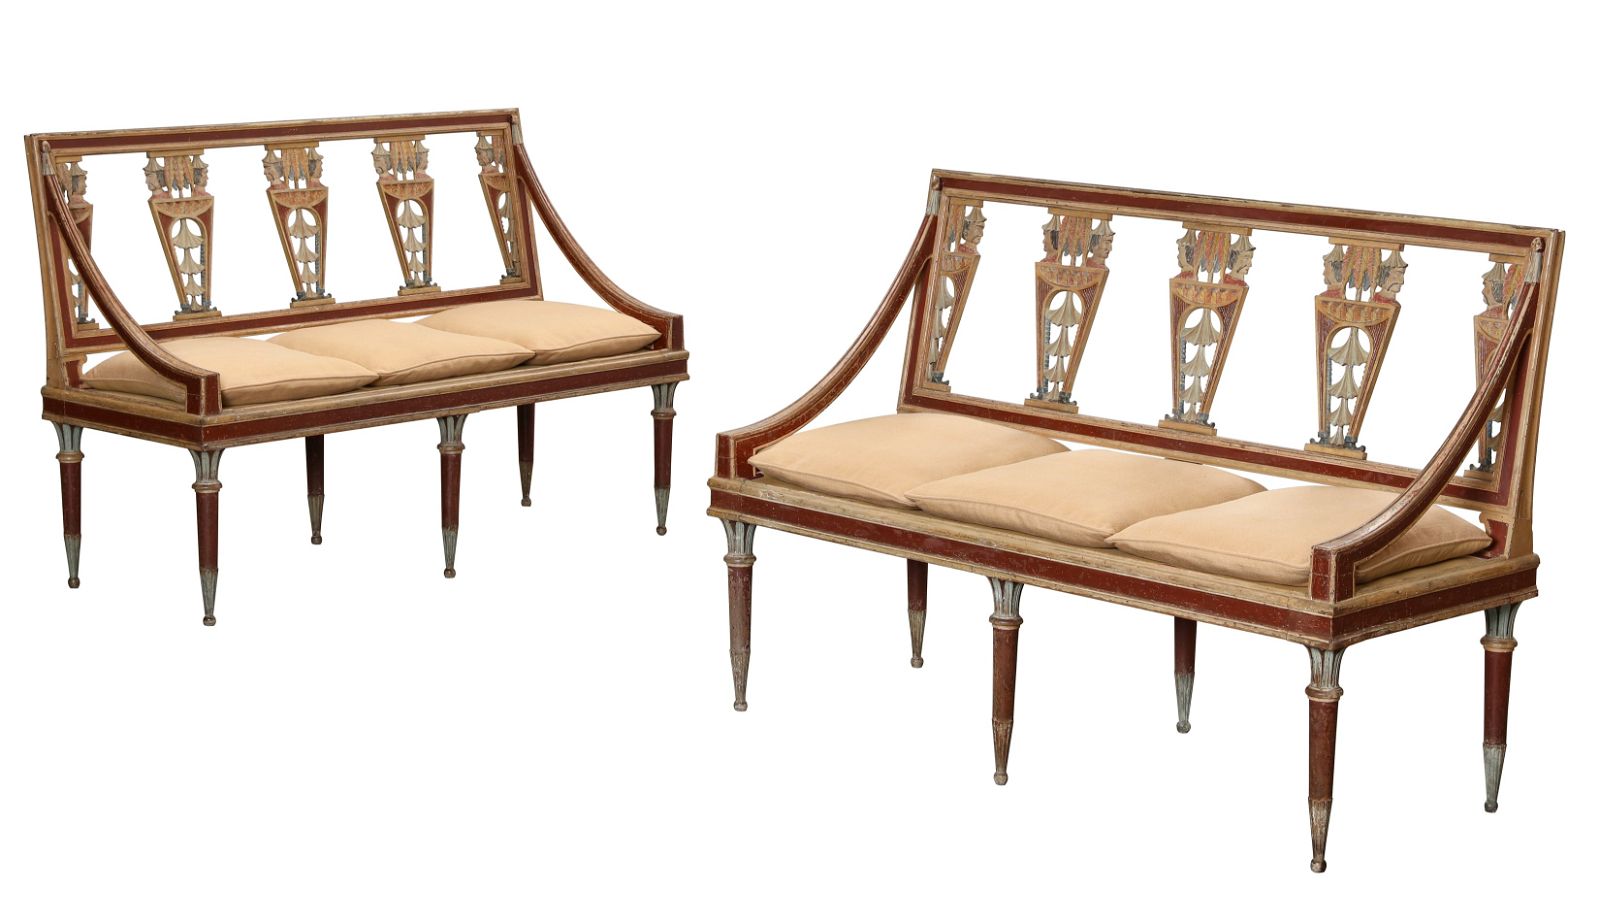 A PAIR OF NORTH ITALIAN CHINOISERIE